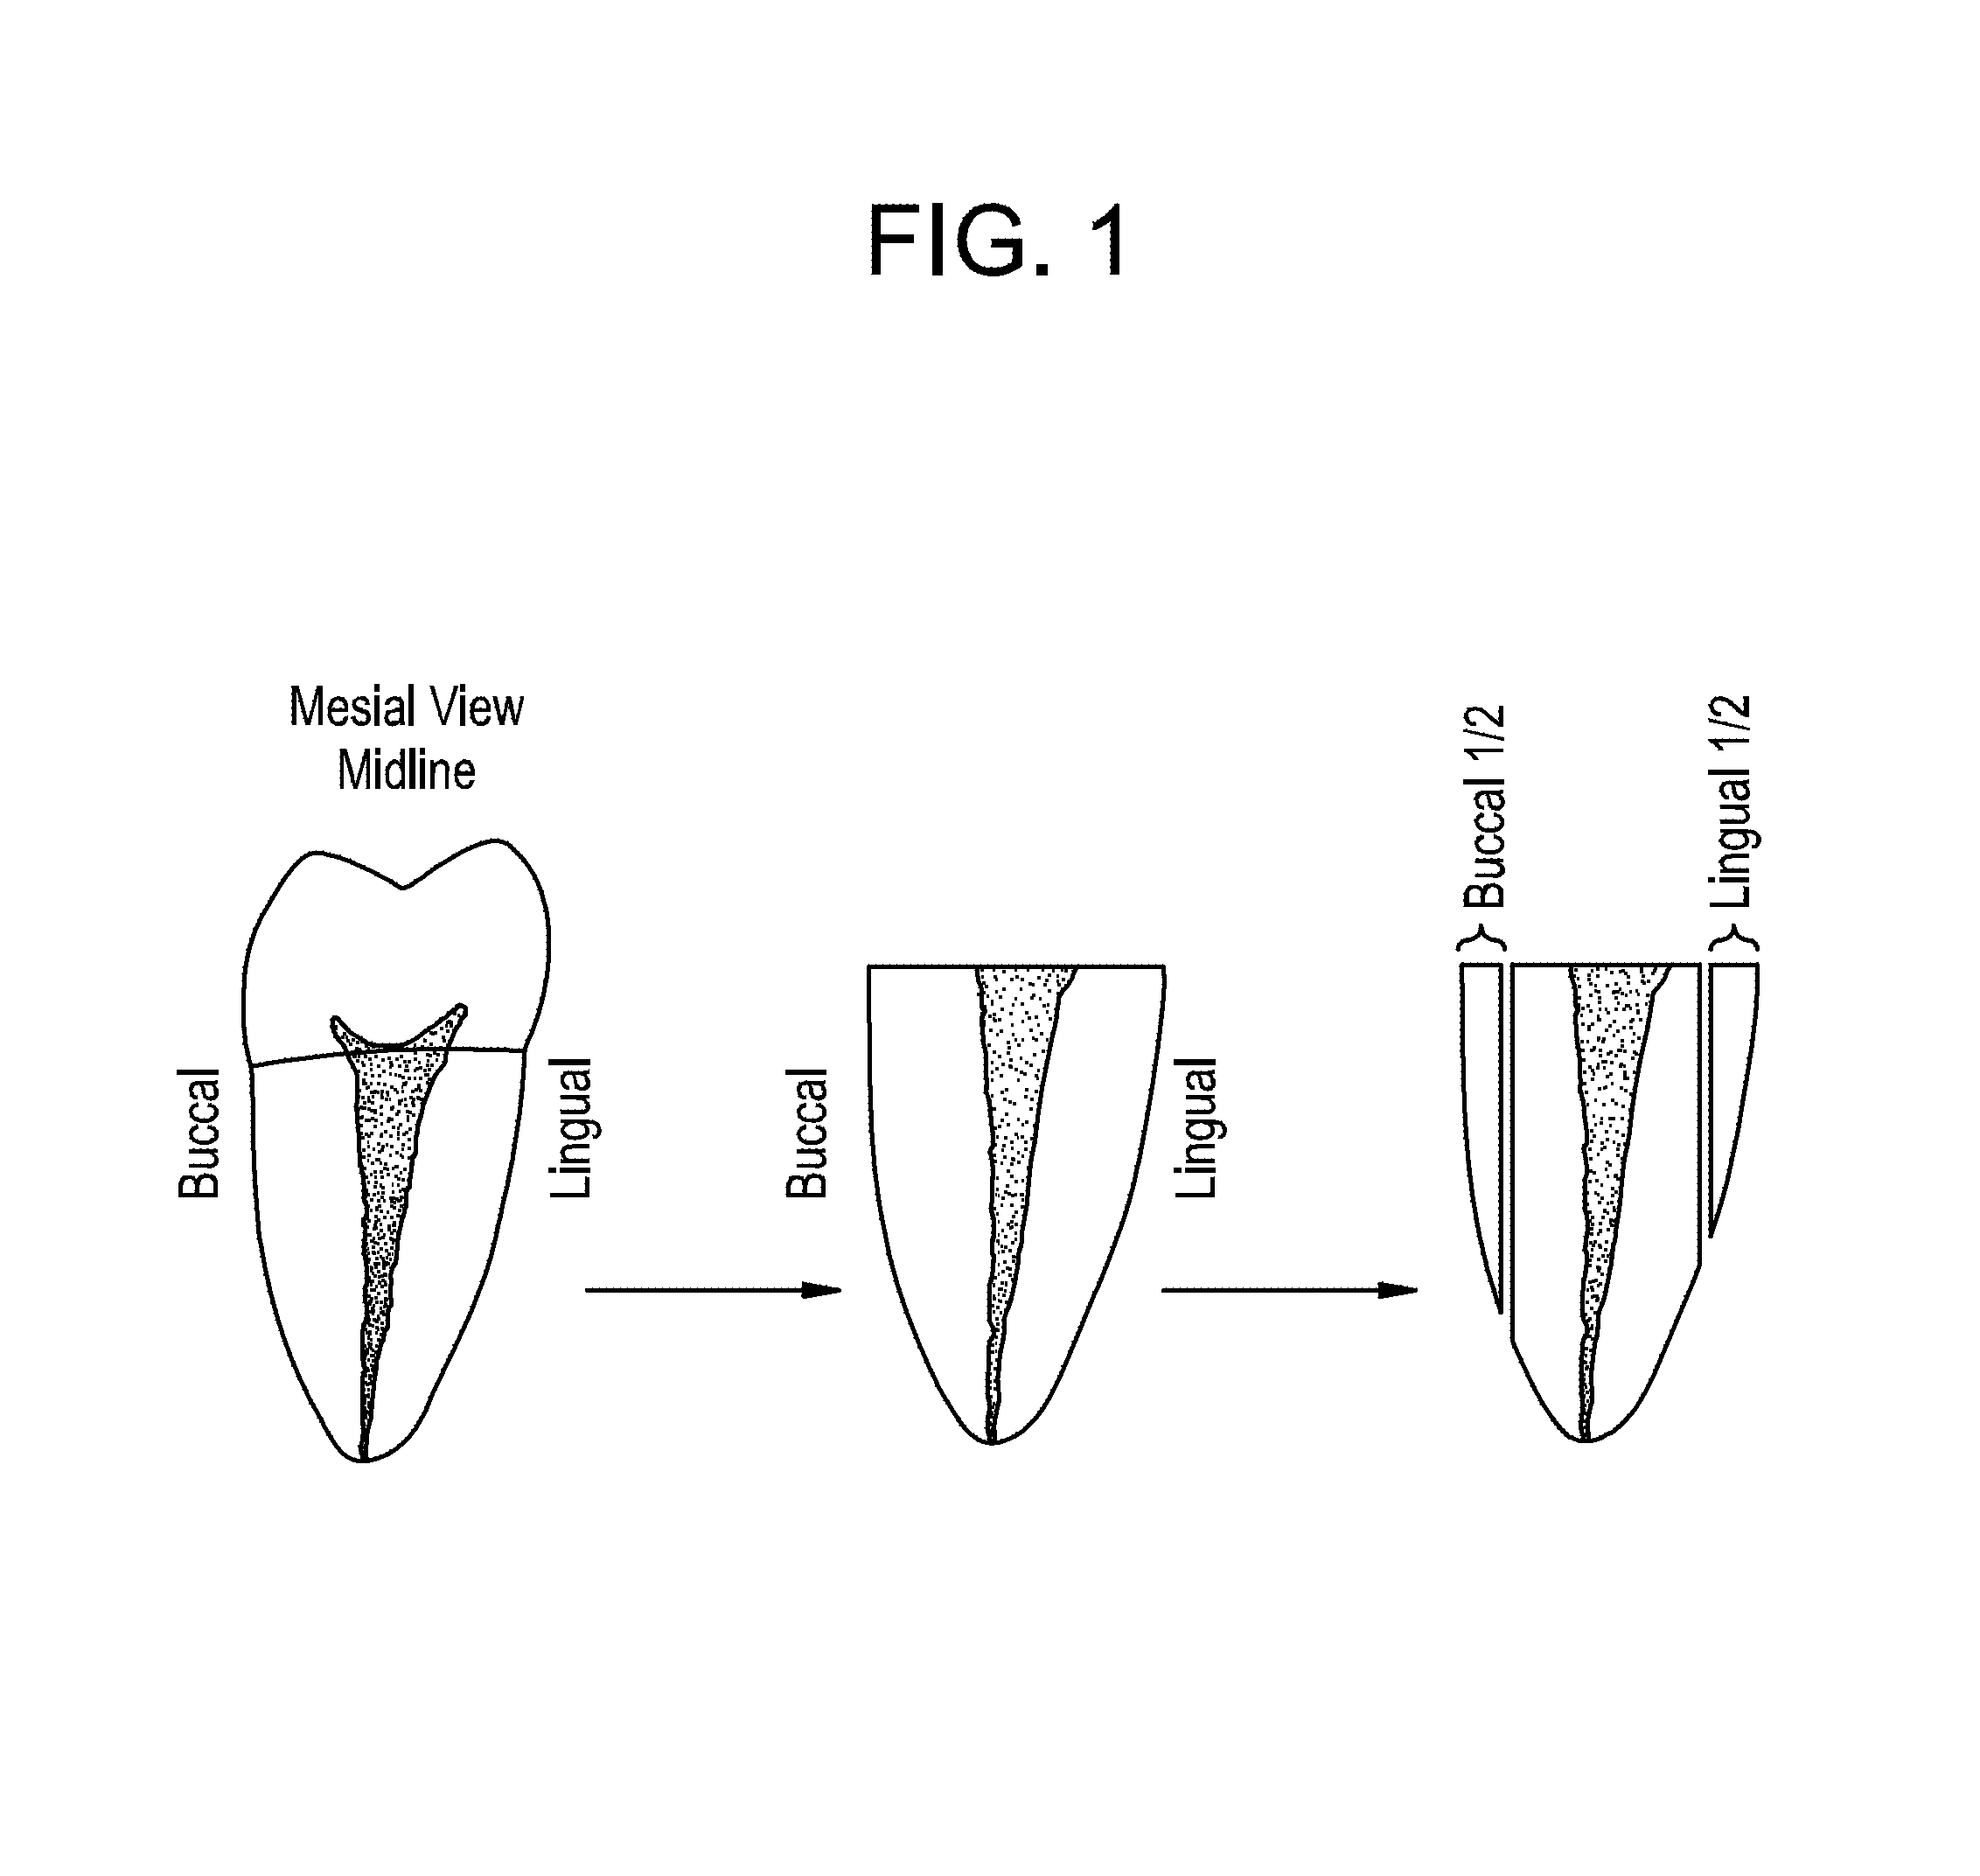 Anti-bacterial and mineralizing calcium phosphate compositions